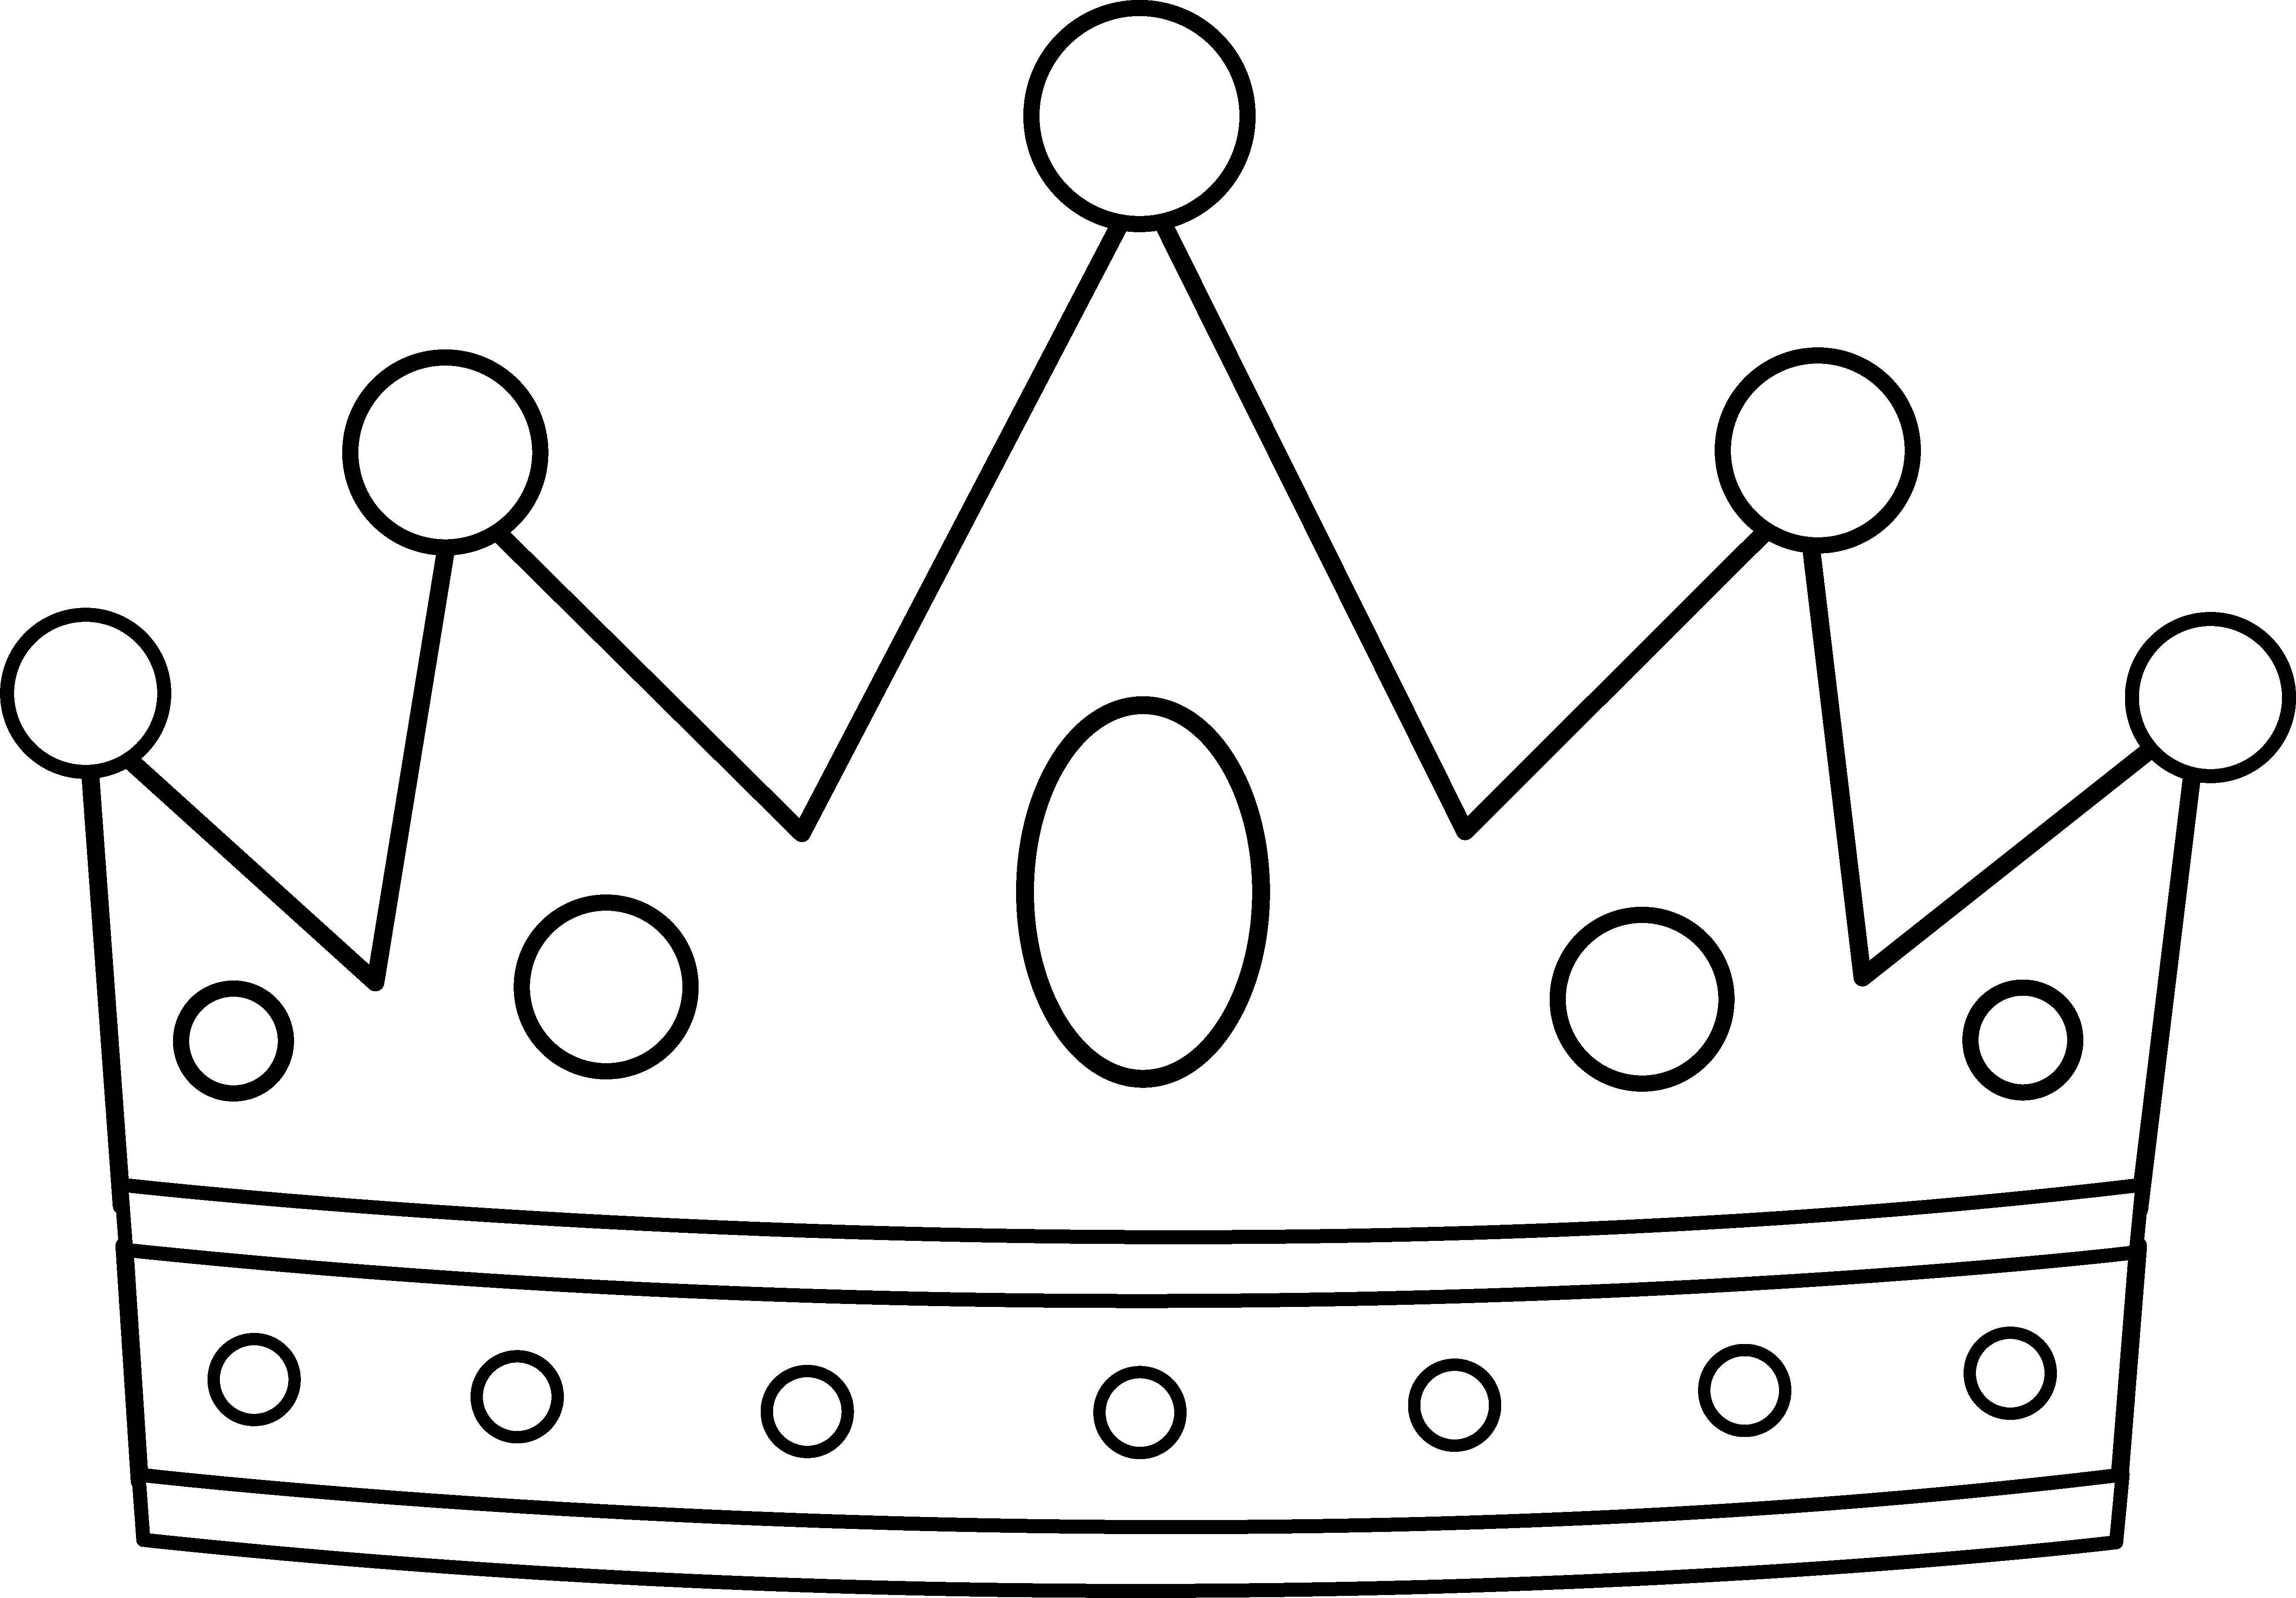 Princess with Crown Coloring Page